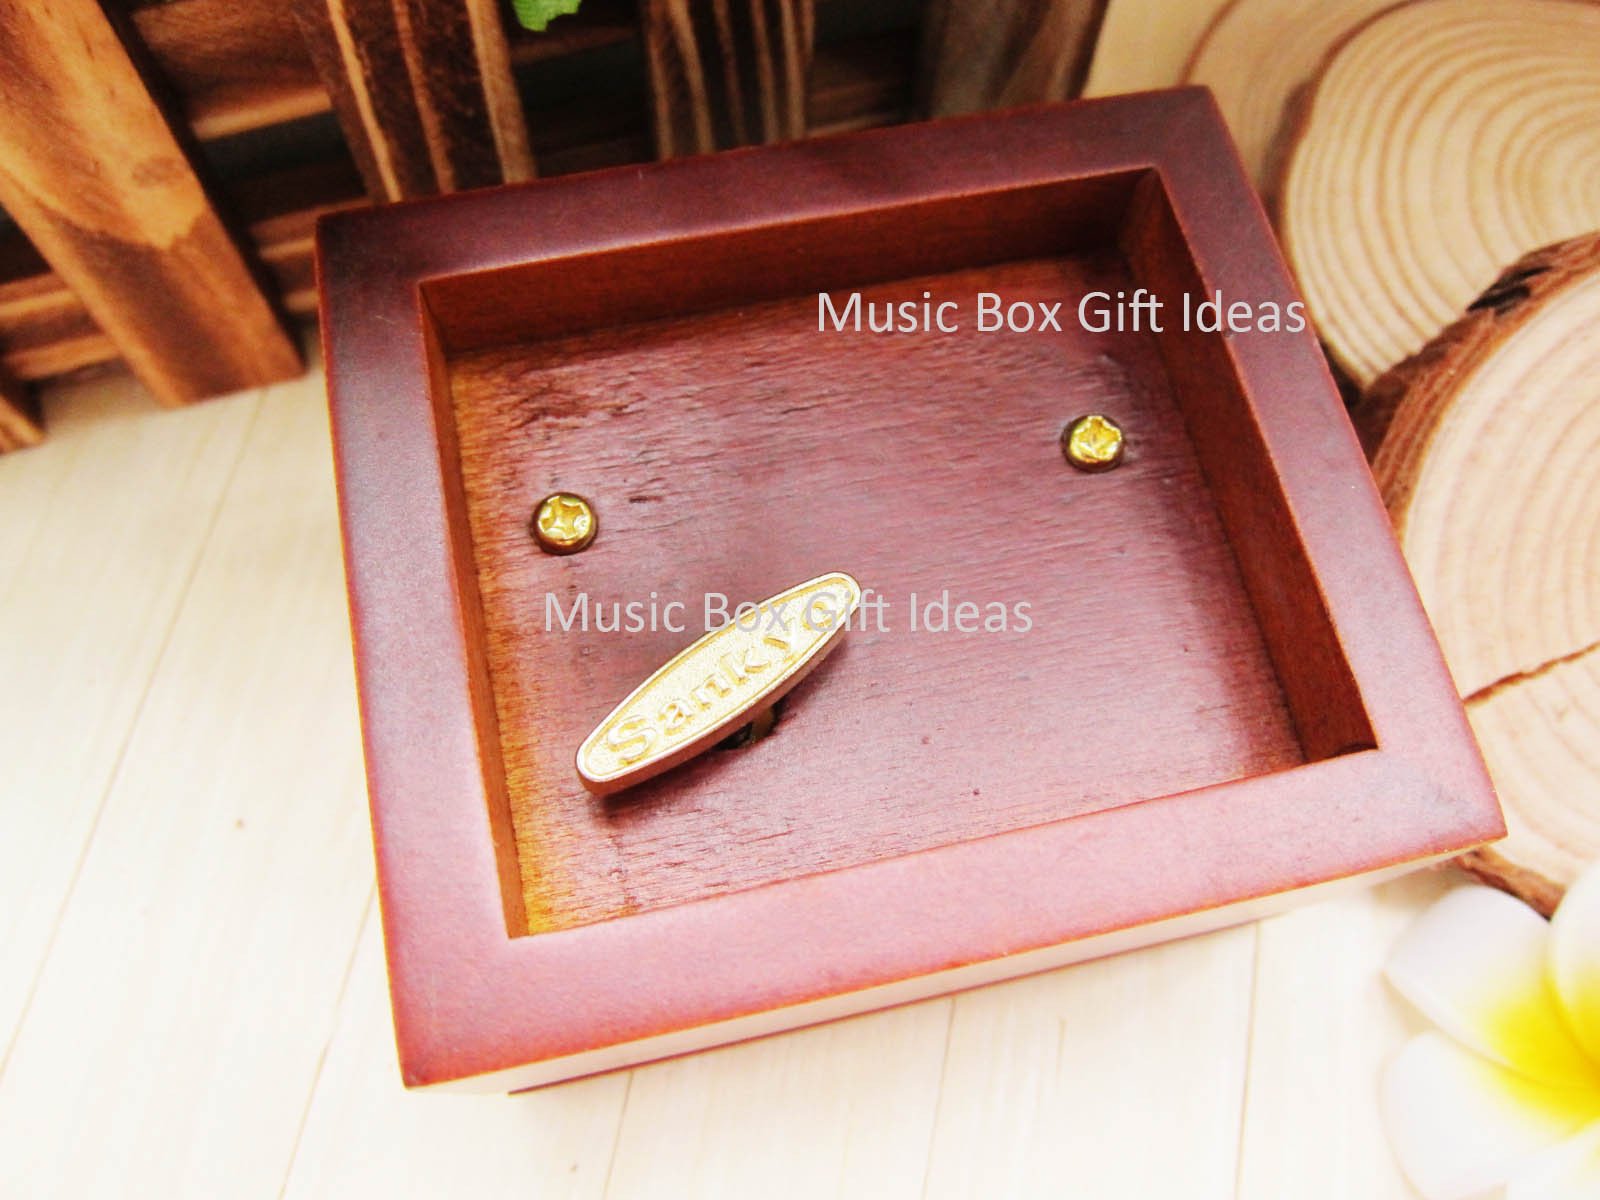 Amazon.com: Ddjbdb Can't Help Falling in Love Wooden Music Box, Engraved Musical  Boxes for Love One,Valentine's Day Gift, Gifts for Lover, Boyfriend,  Girlfriend, Husband, Wife : Home & Kitchen